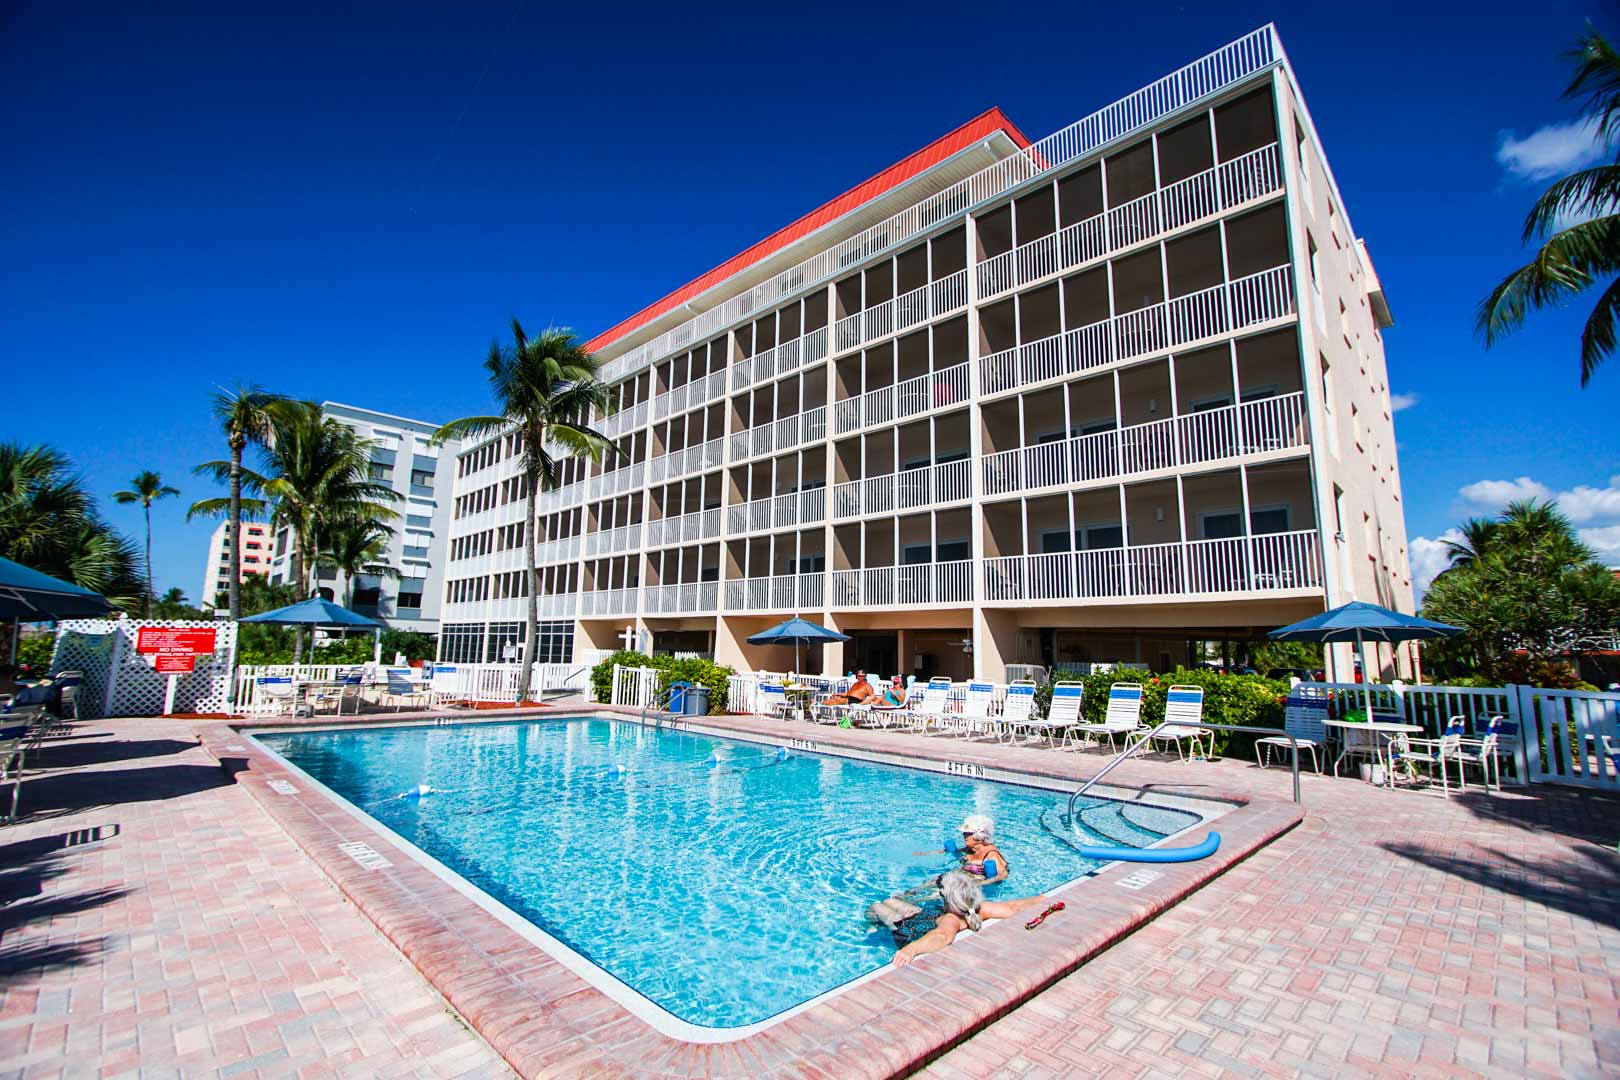 A crisp outdoor swimming pool at VRI's Windward Passage Resort in Fort Myers Beach, Florida.